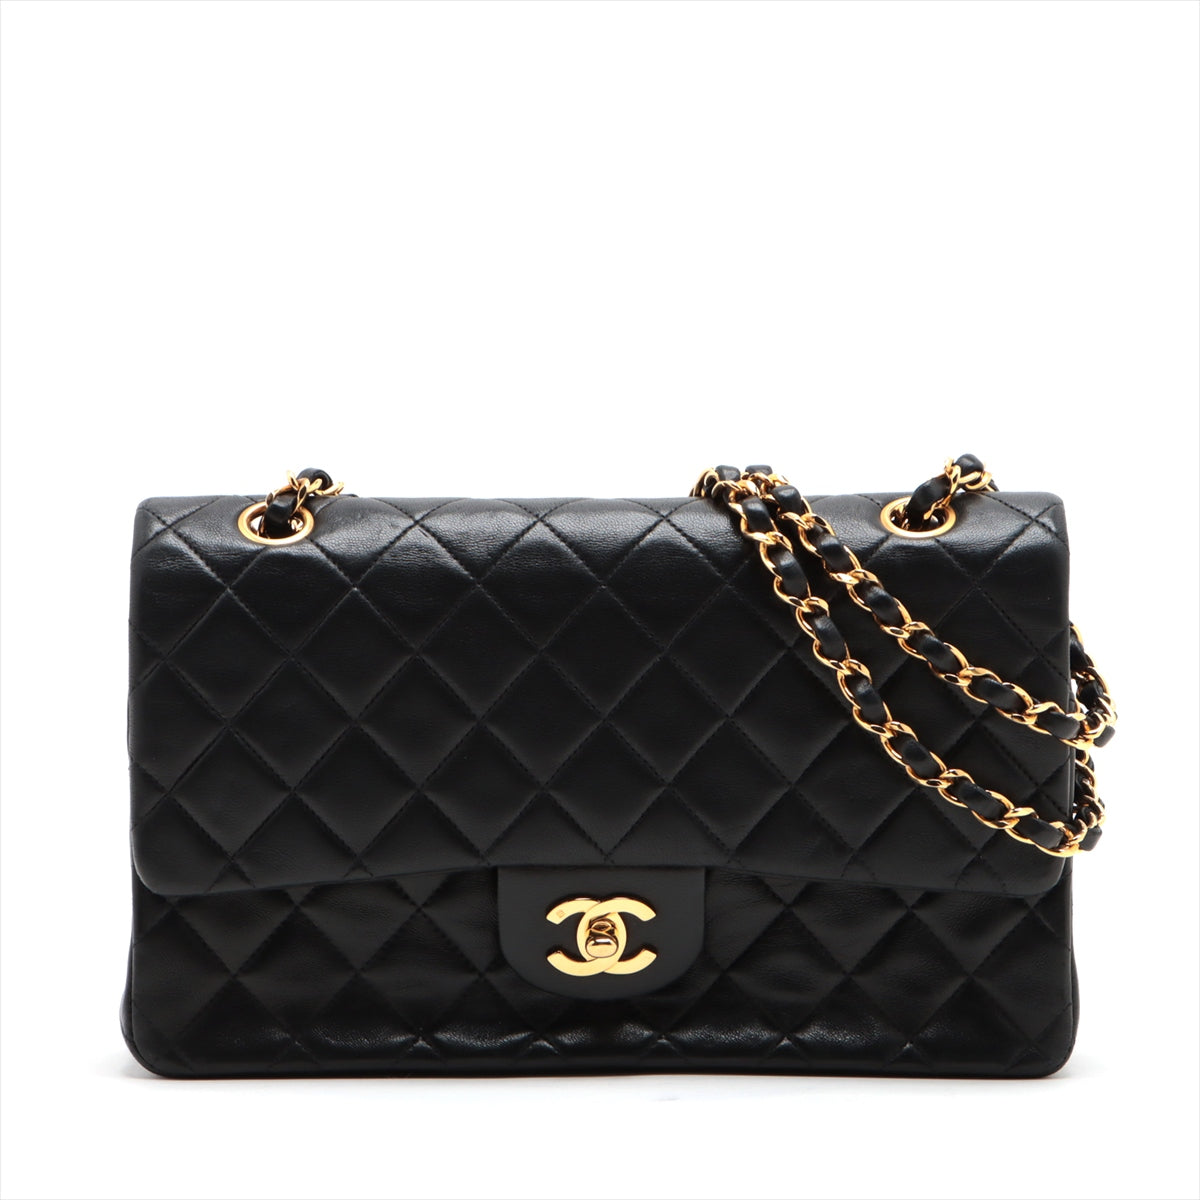 Chanel Matelasse Lambskin Double flap Double chain bag Black Gold Metal fittings Turn lock hardening There is an abnormal noise